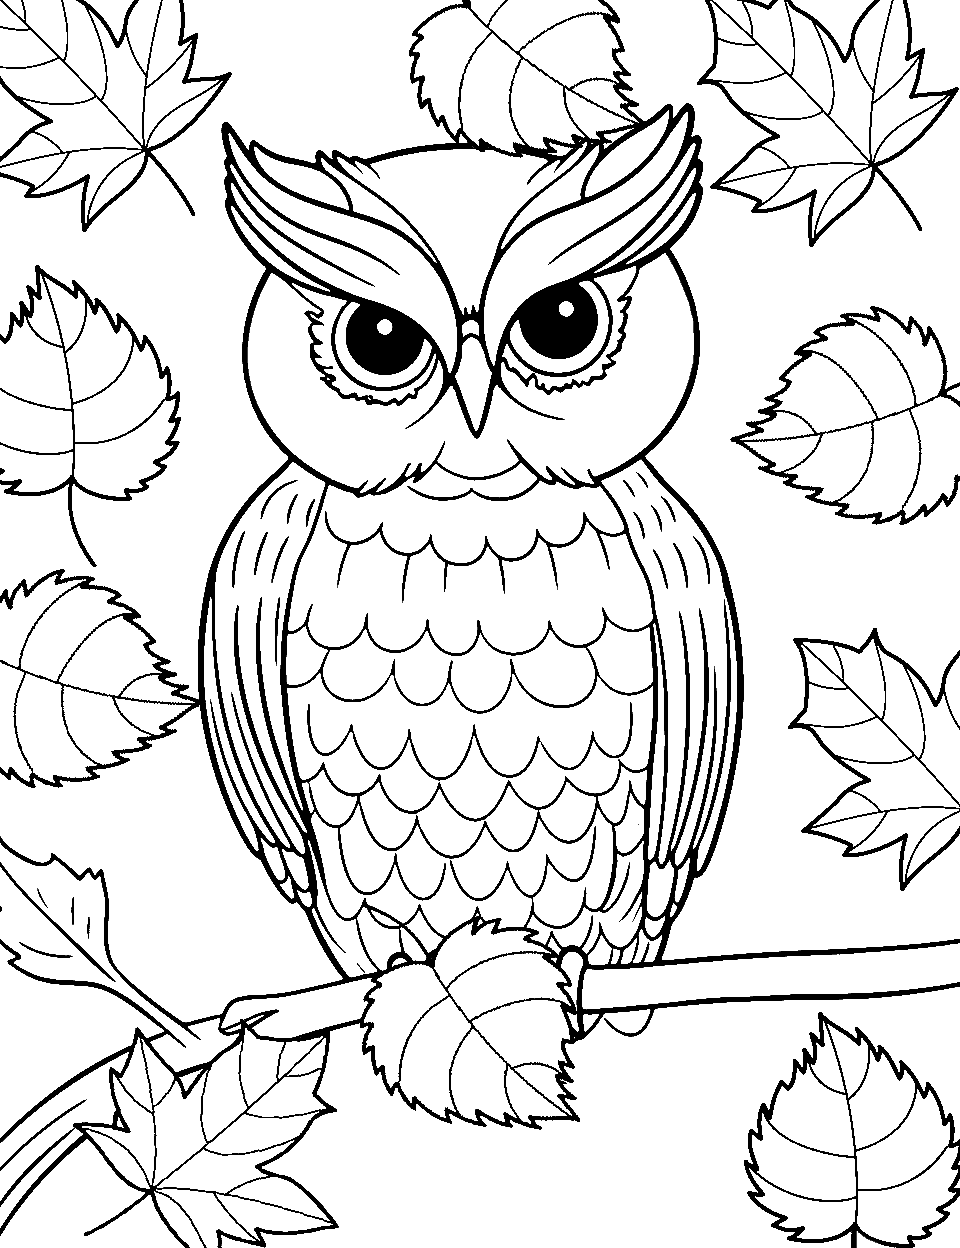 Owl in Fall Leaves Coloring Page - An owl surrounded by colorful autumn leaves.